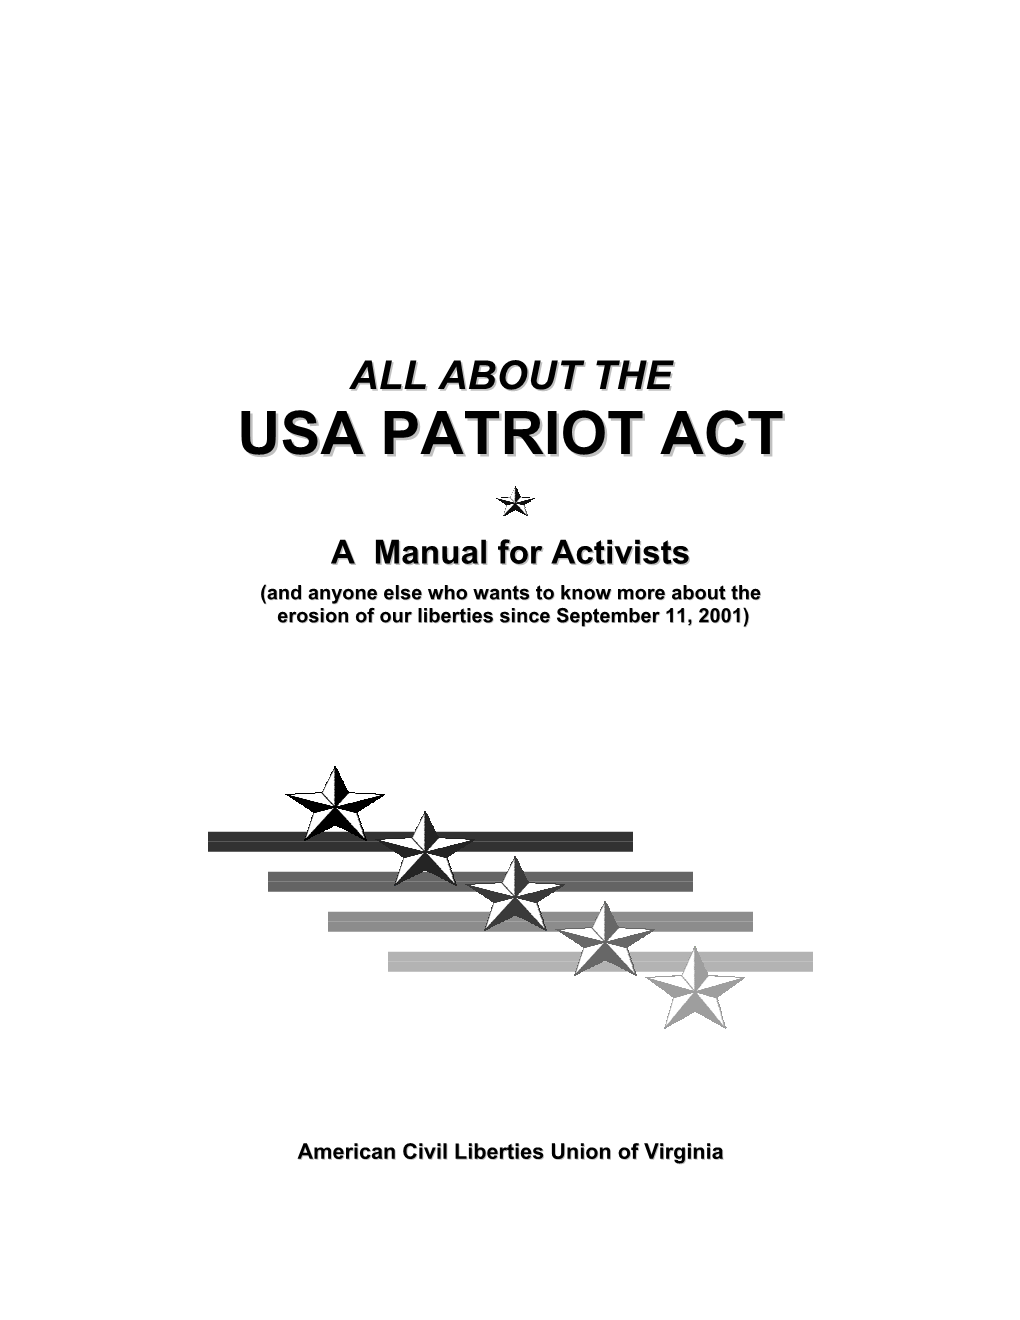 USA PATRIOT ACT a Manual for Activists (And Anyone Else Who Wants to Know More About the Erosion of Our Liberties Since September 11, 2001)